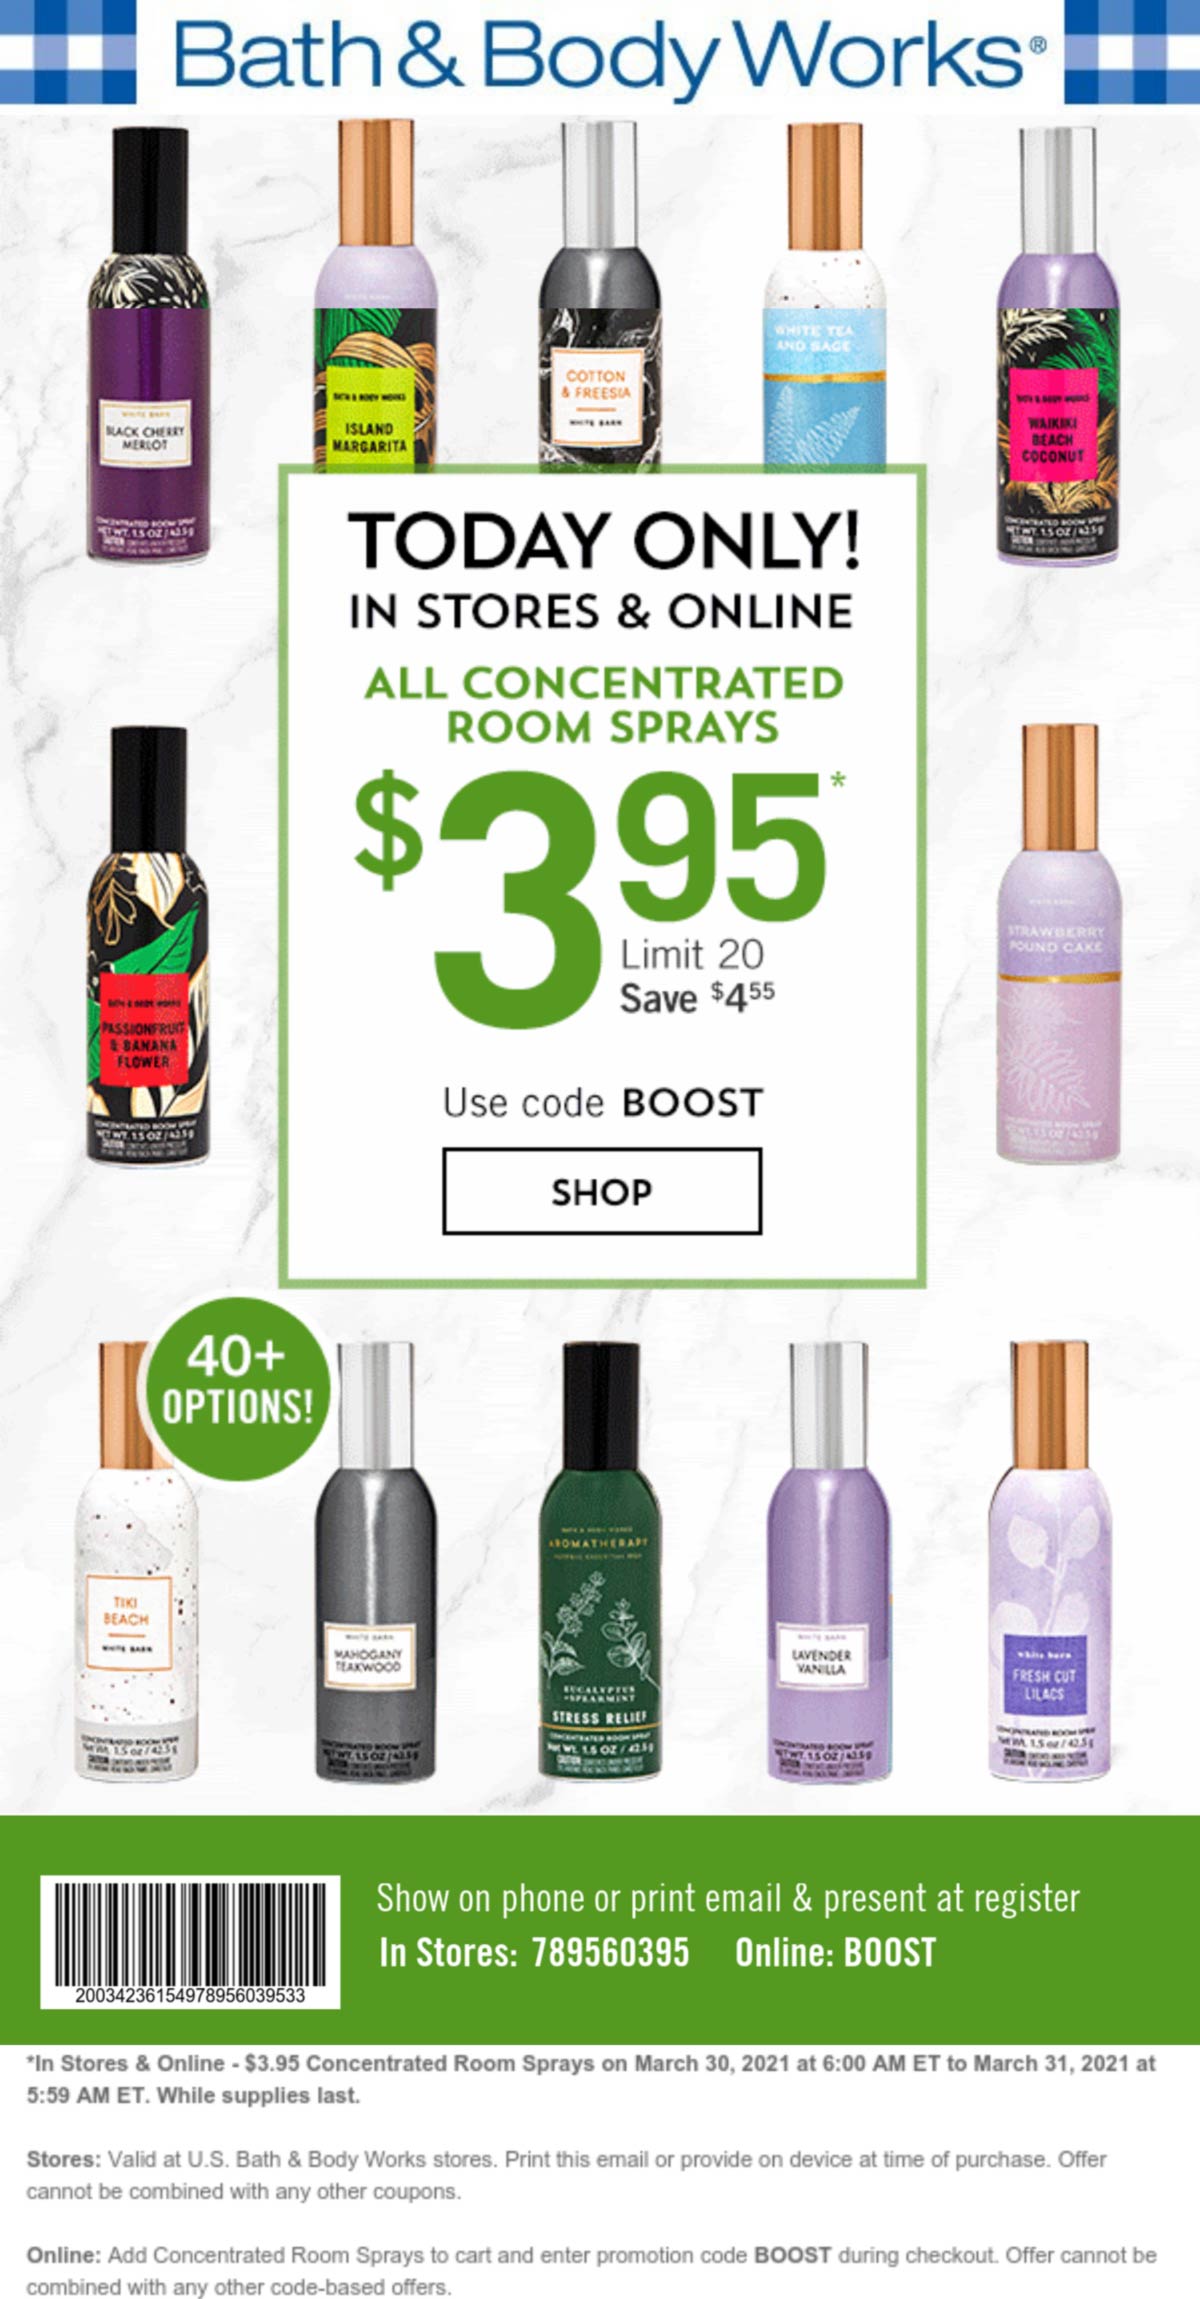 Bath & Body Works stores Coupon  Concentrated room sprays $4 today at Bath & Body Works, or online via promo code BOOST #bathbodyworks 